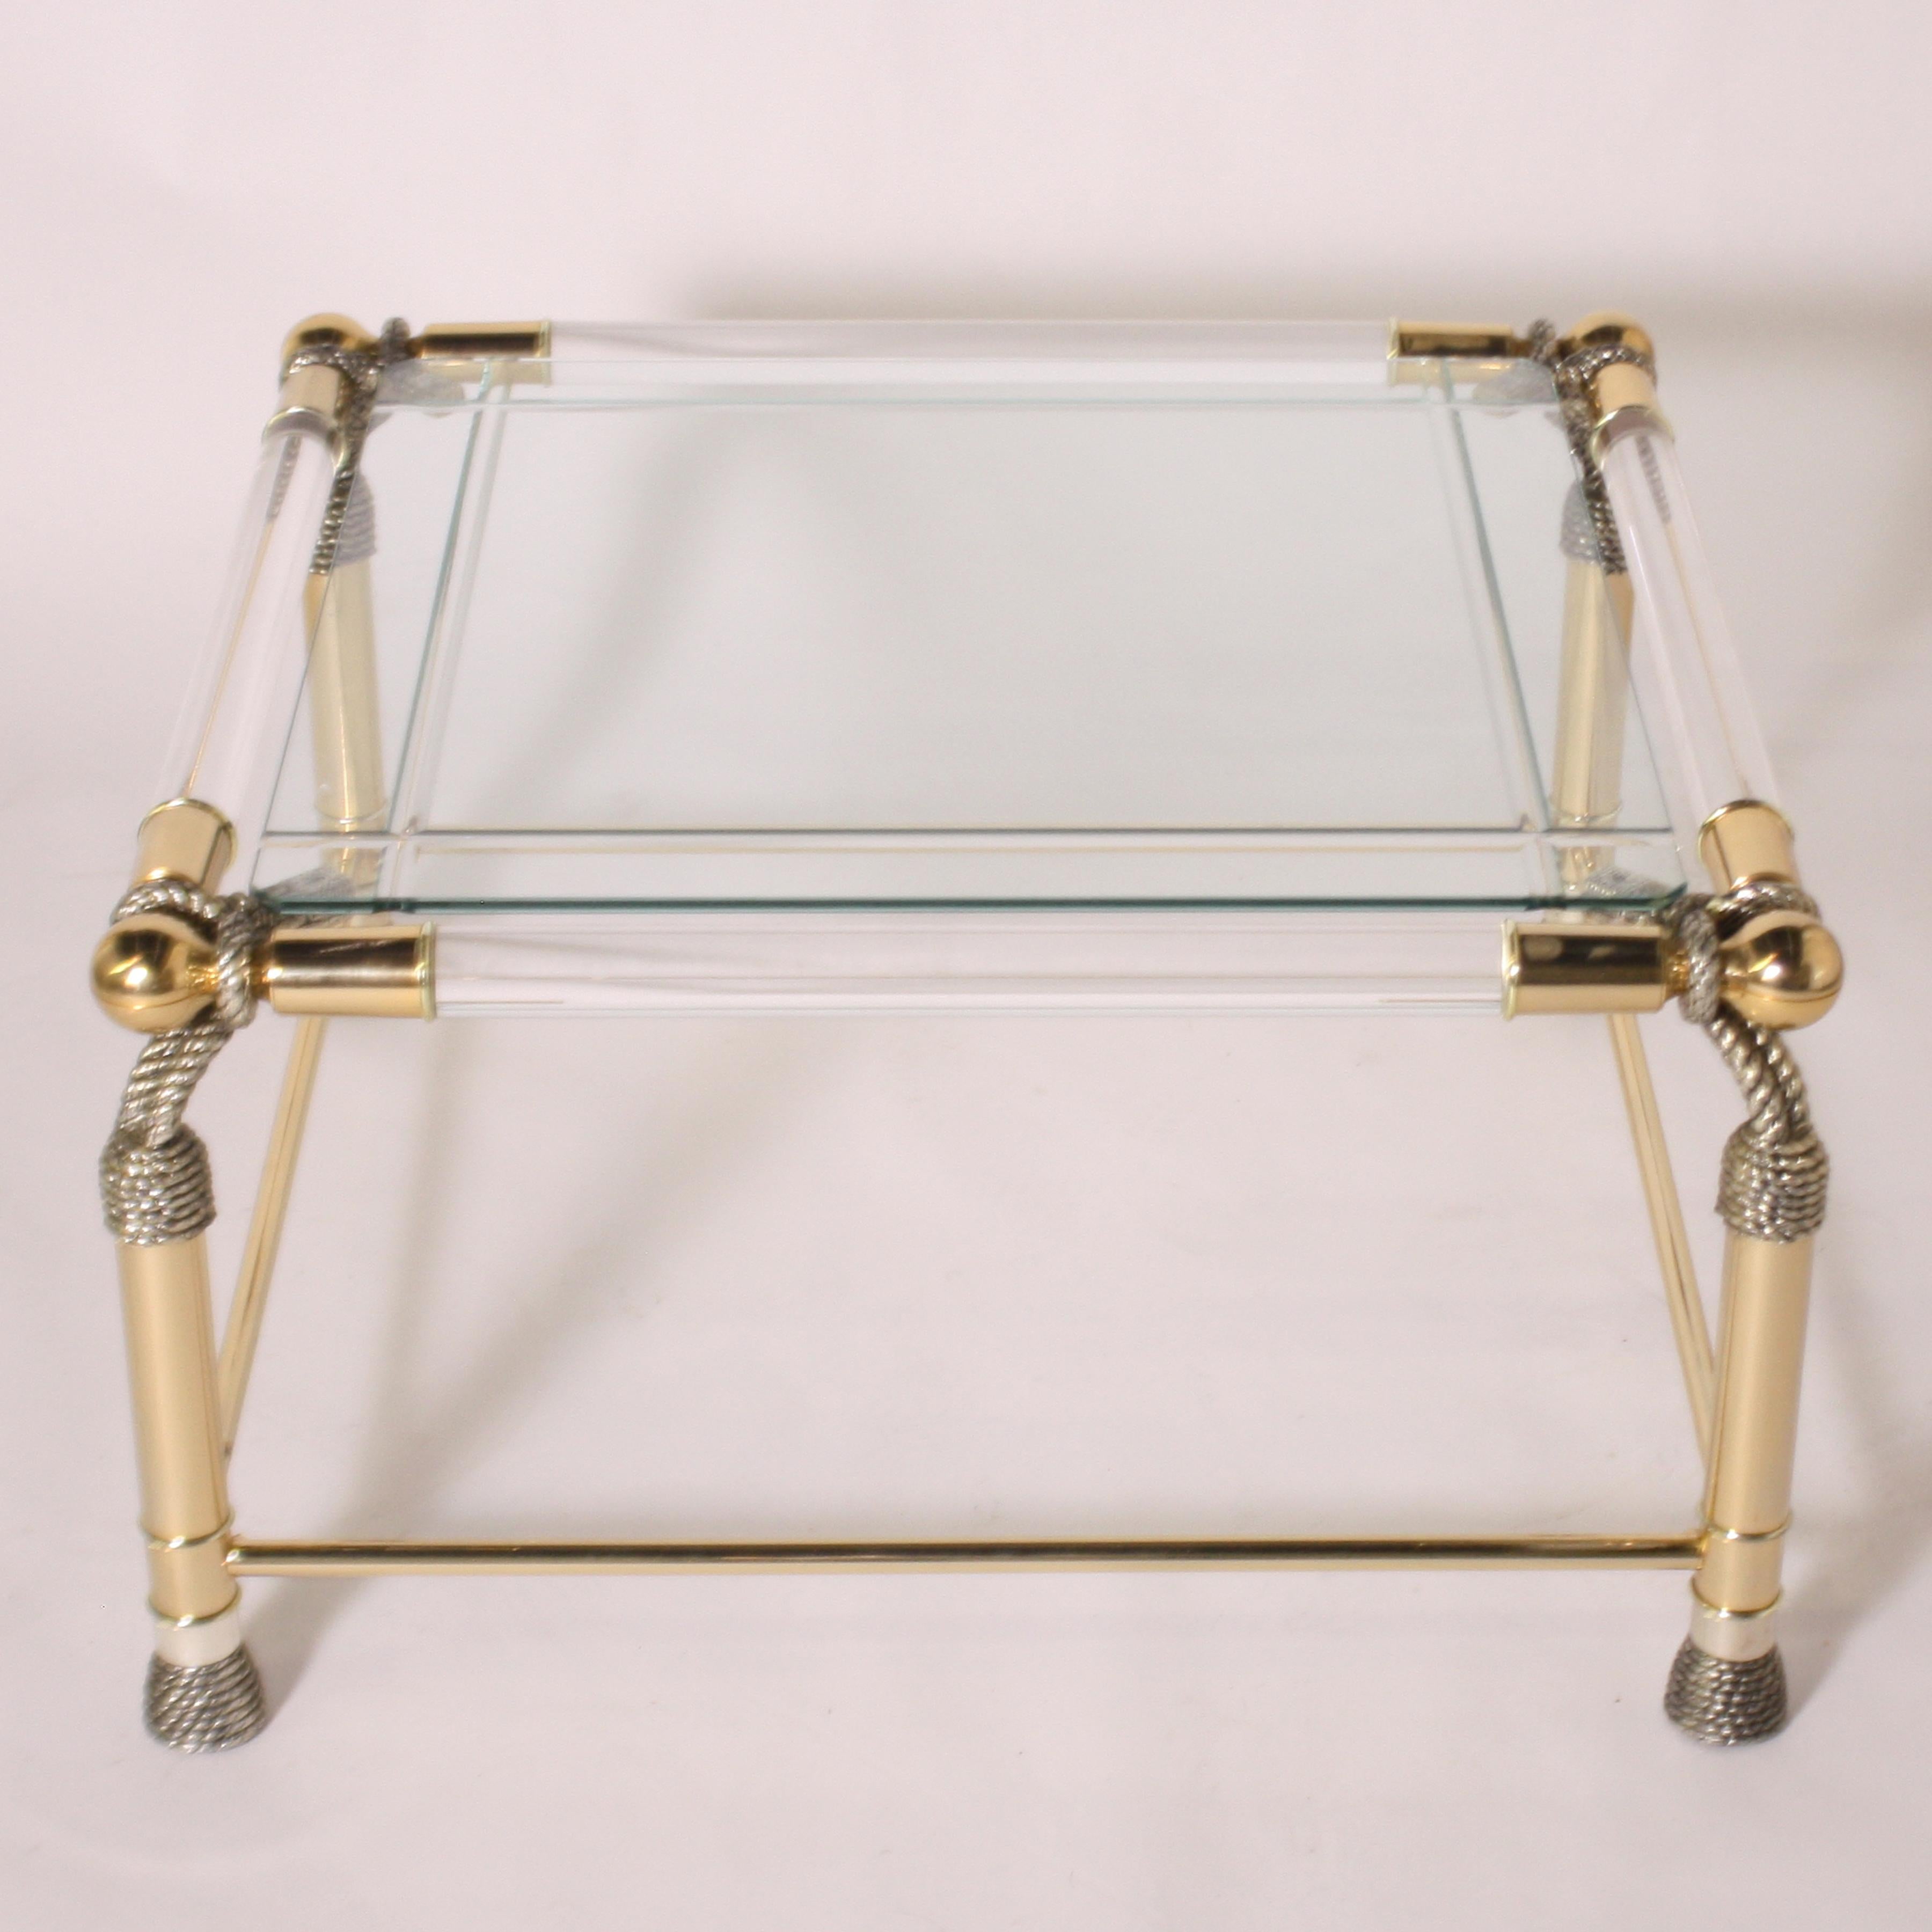 Brass and Lucite rope motif table, circa 1950.